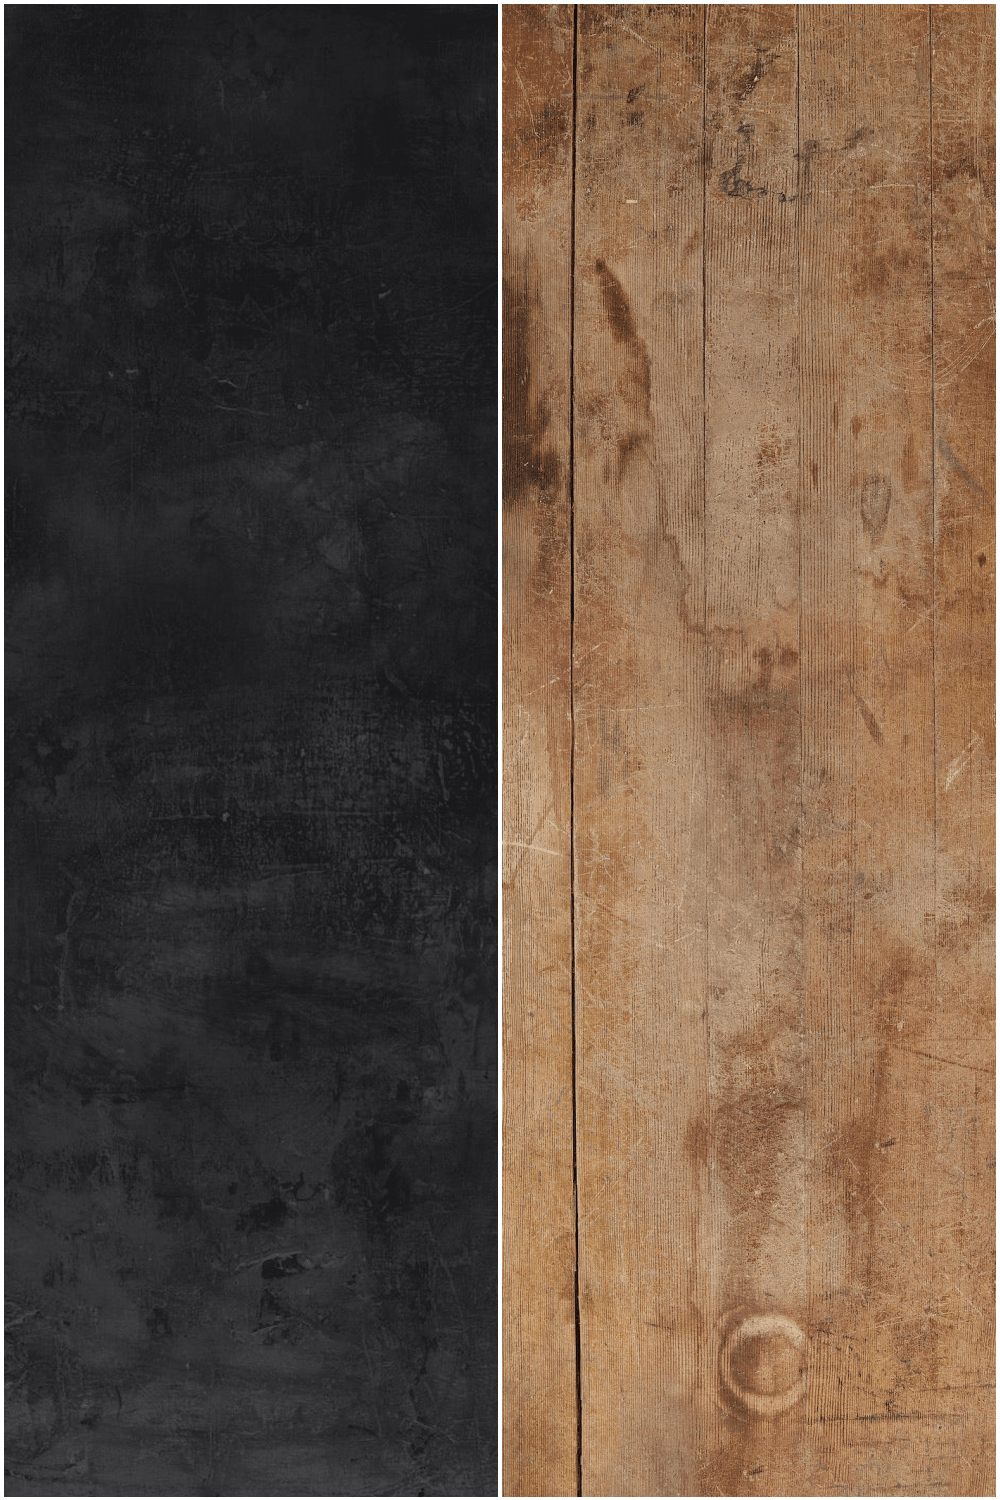 Textured Black and Warm Wooden Backdrop Bundle